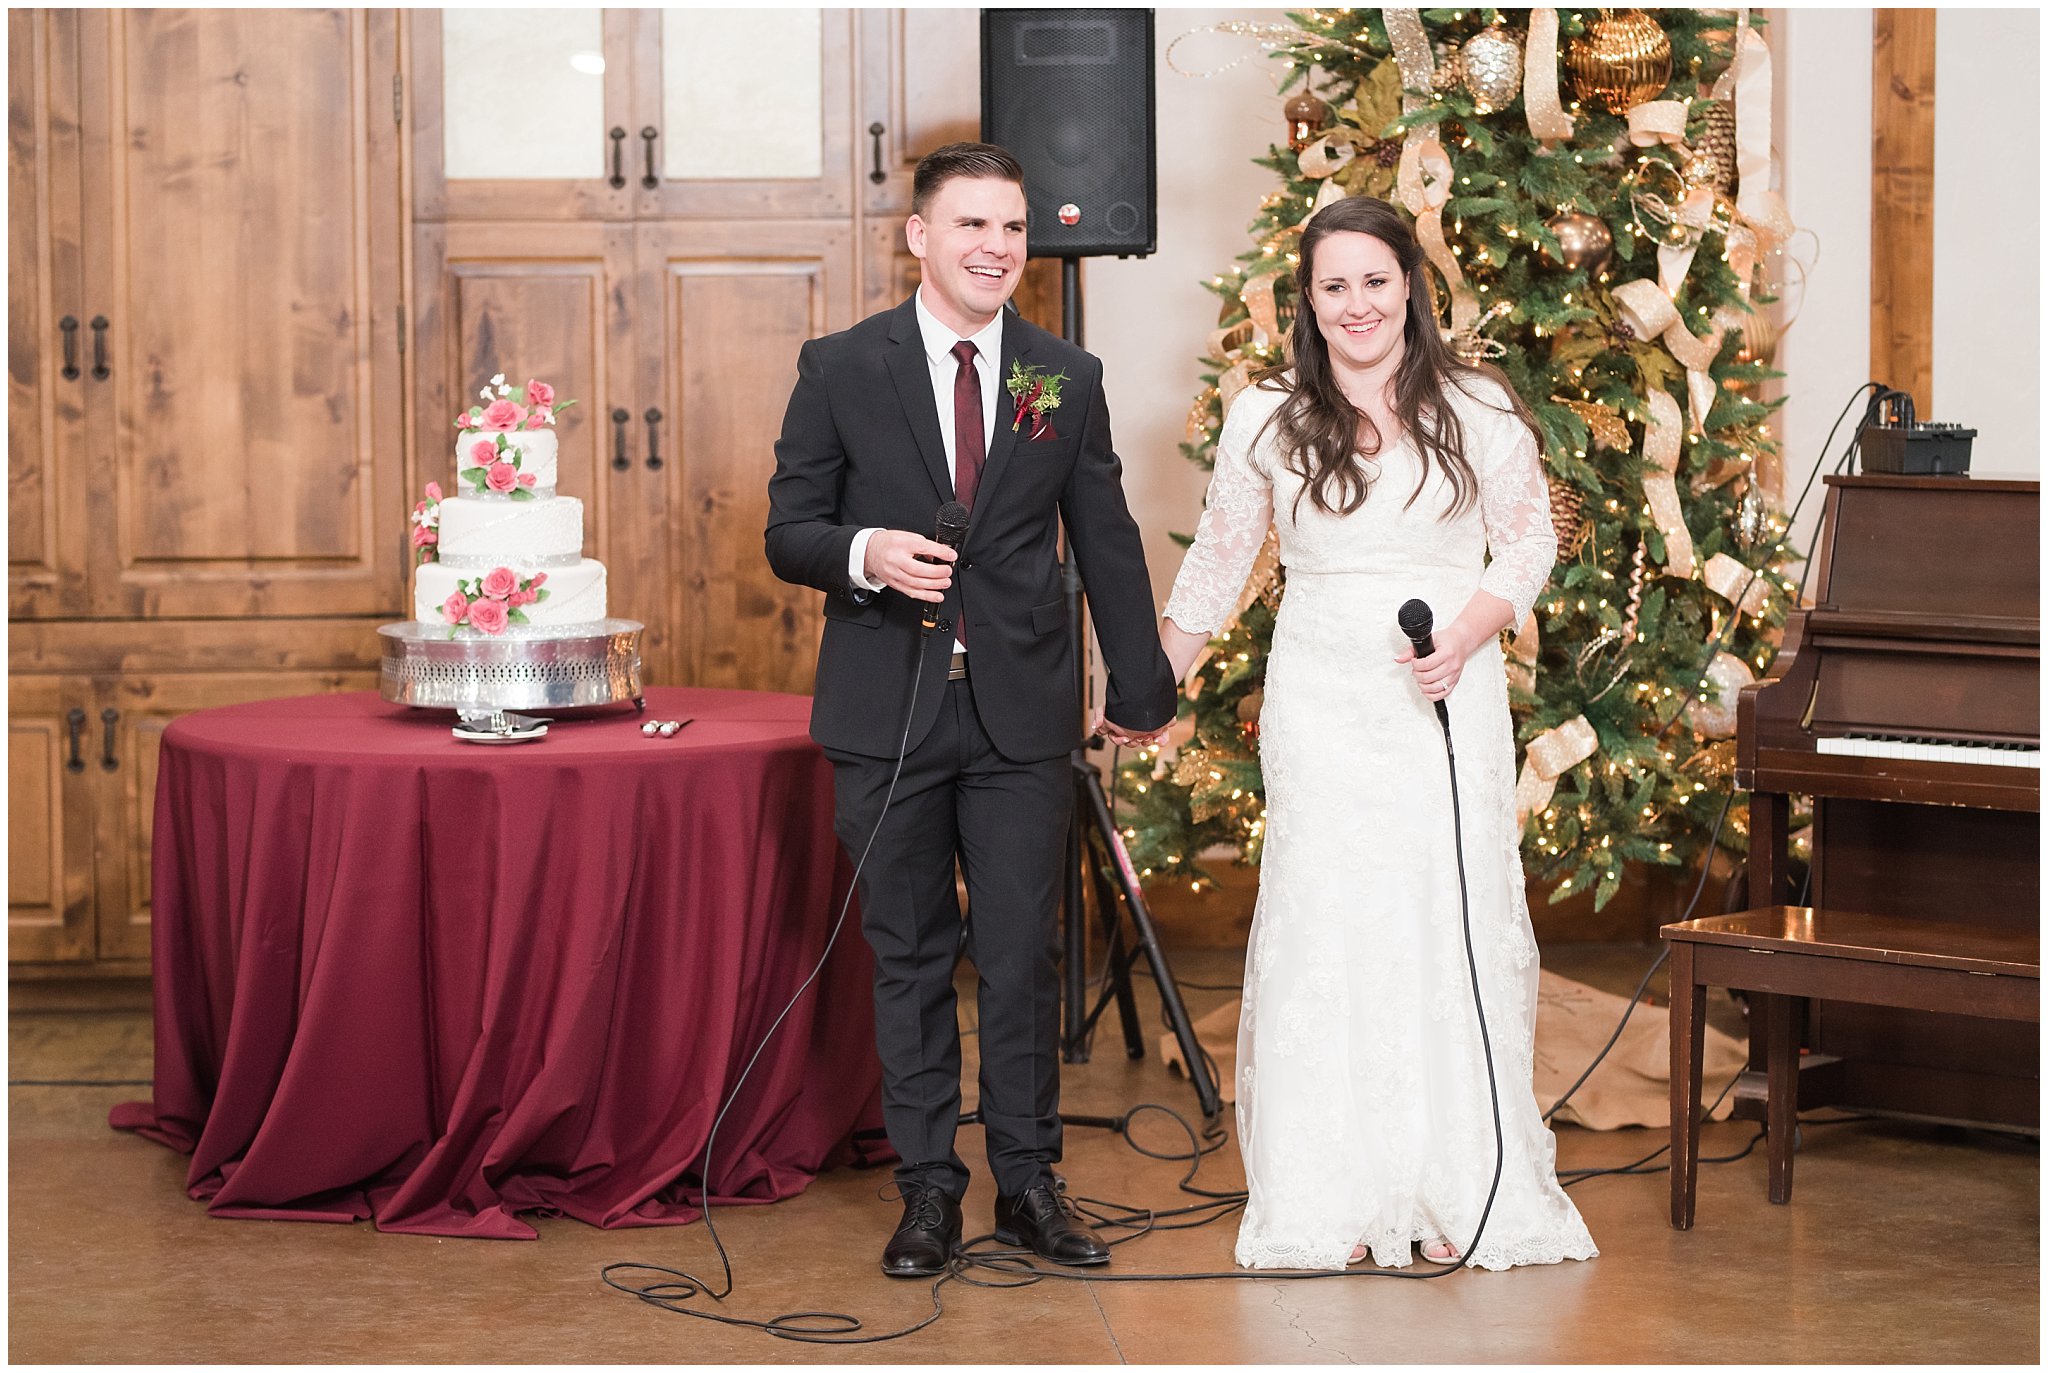 Bride and groom sing a song before dinner at the Gathering Place at Gardner Village | Gardner Village Wedding | The Gathering Place | Jessie and Dallin Photography